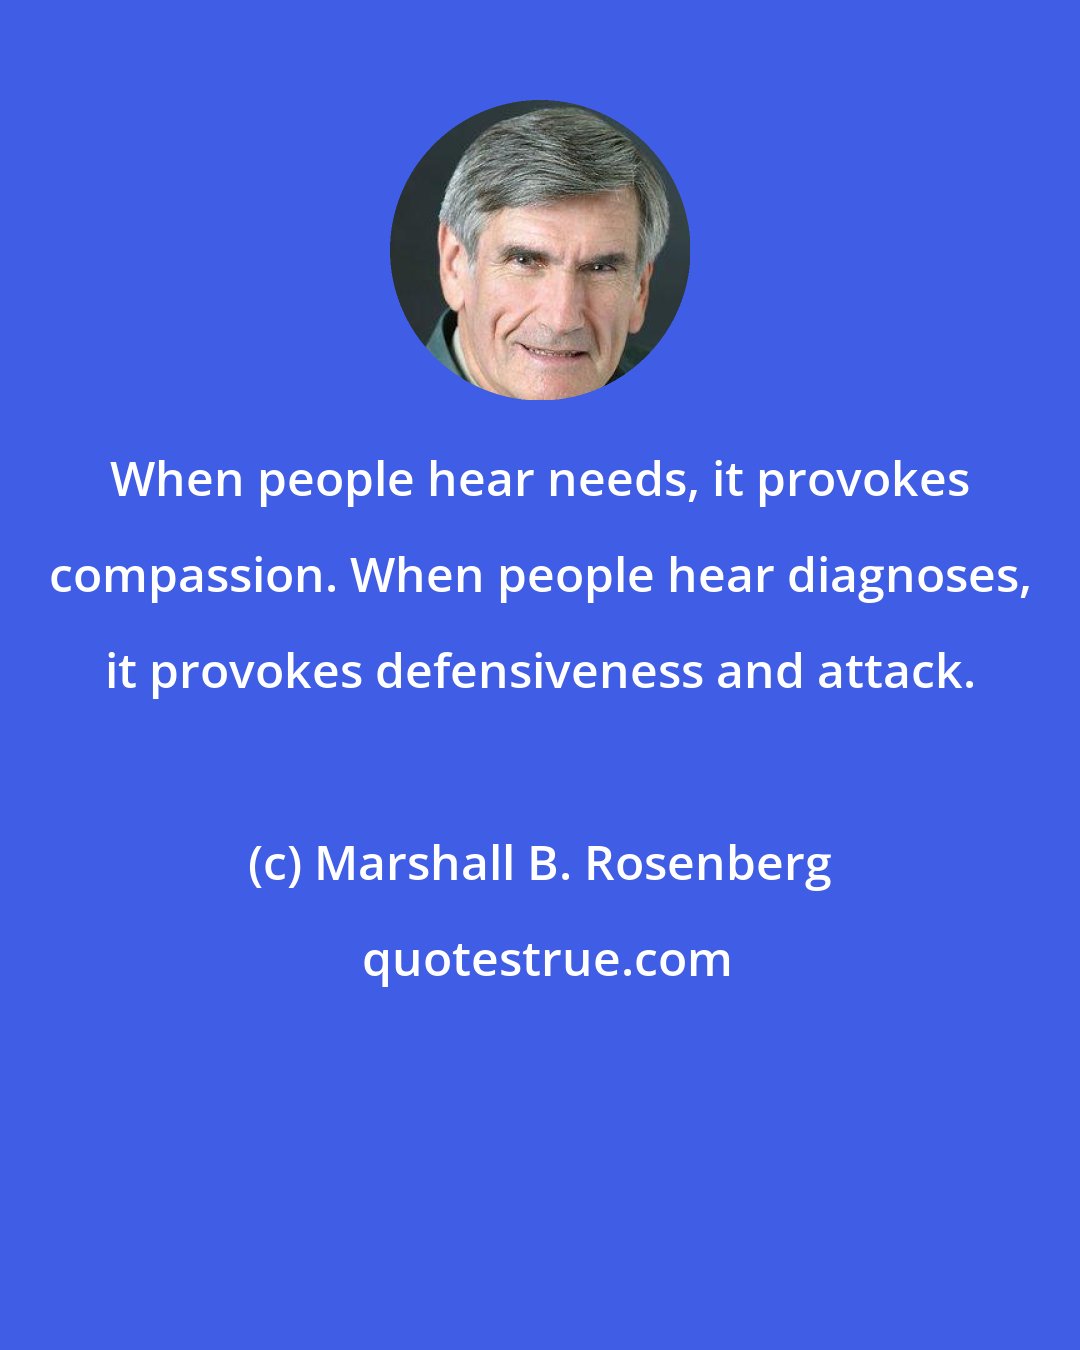 Marshall B. Rosenberg: When people hear needs, it provokes compassion. When people hear diagnoses, it provokes defensiveness and attack.